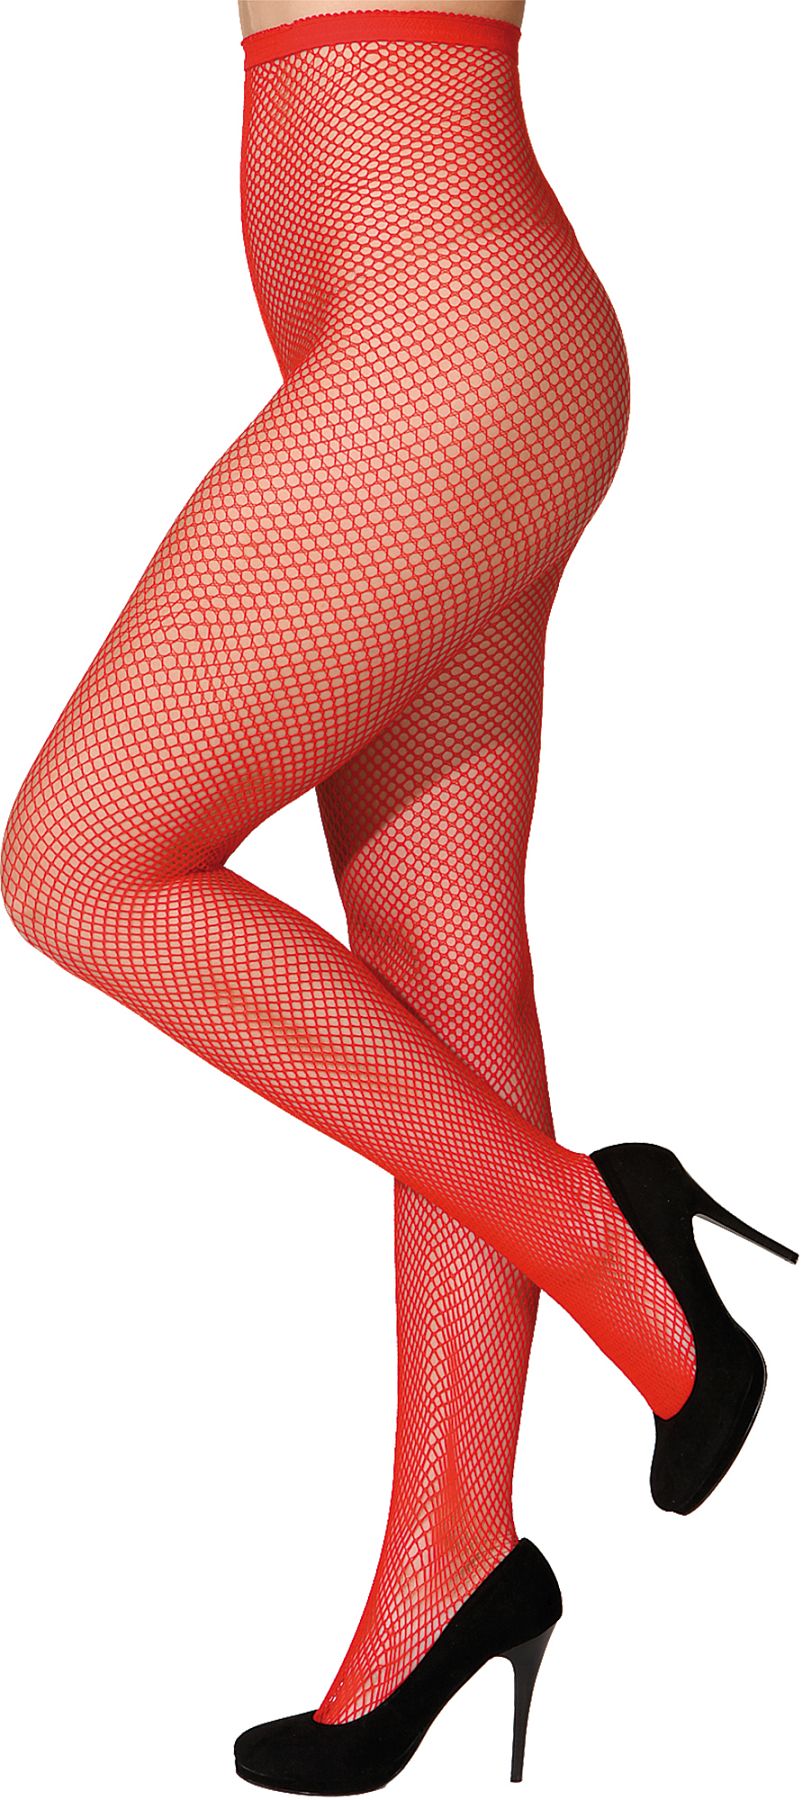 Net tights, small red mesh